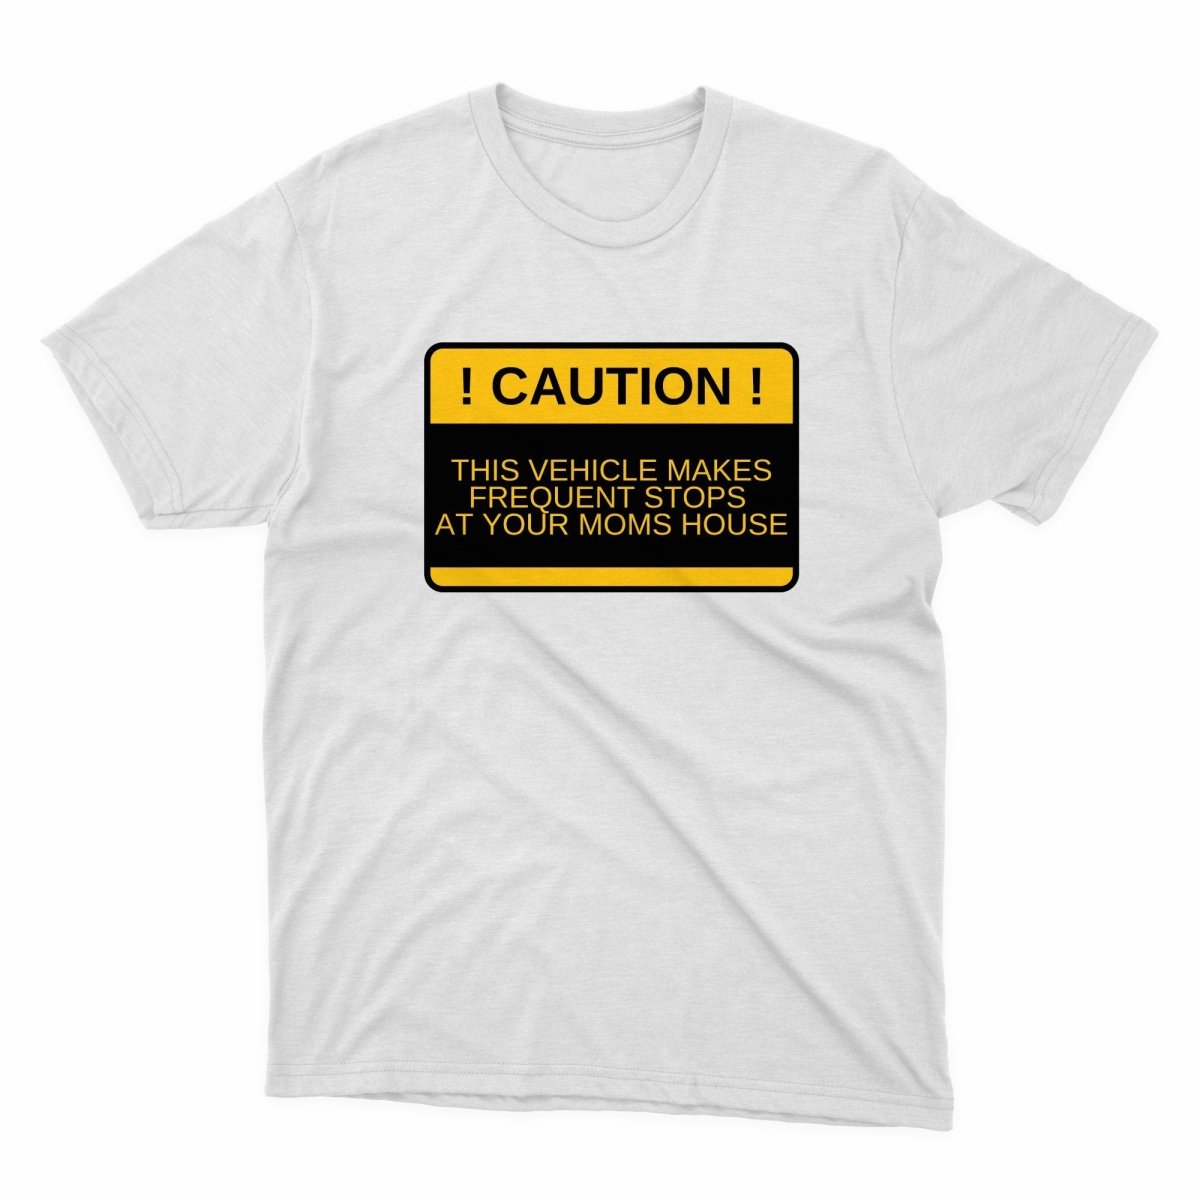 Caution Frequent Stops At Your Moms House Shirt - stickerbullCaution Frequent Stops At Your Moms House ShirtShirtsPrintifystickerbull55049424793147163892WhiteSa white t - shirt with the words caution on it